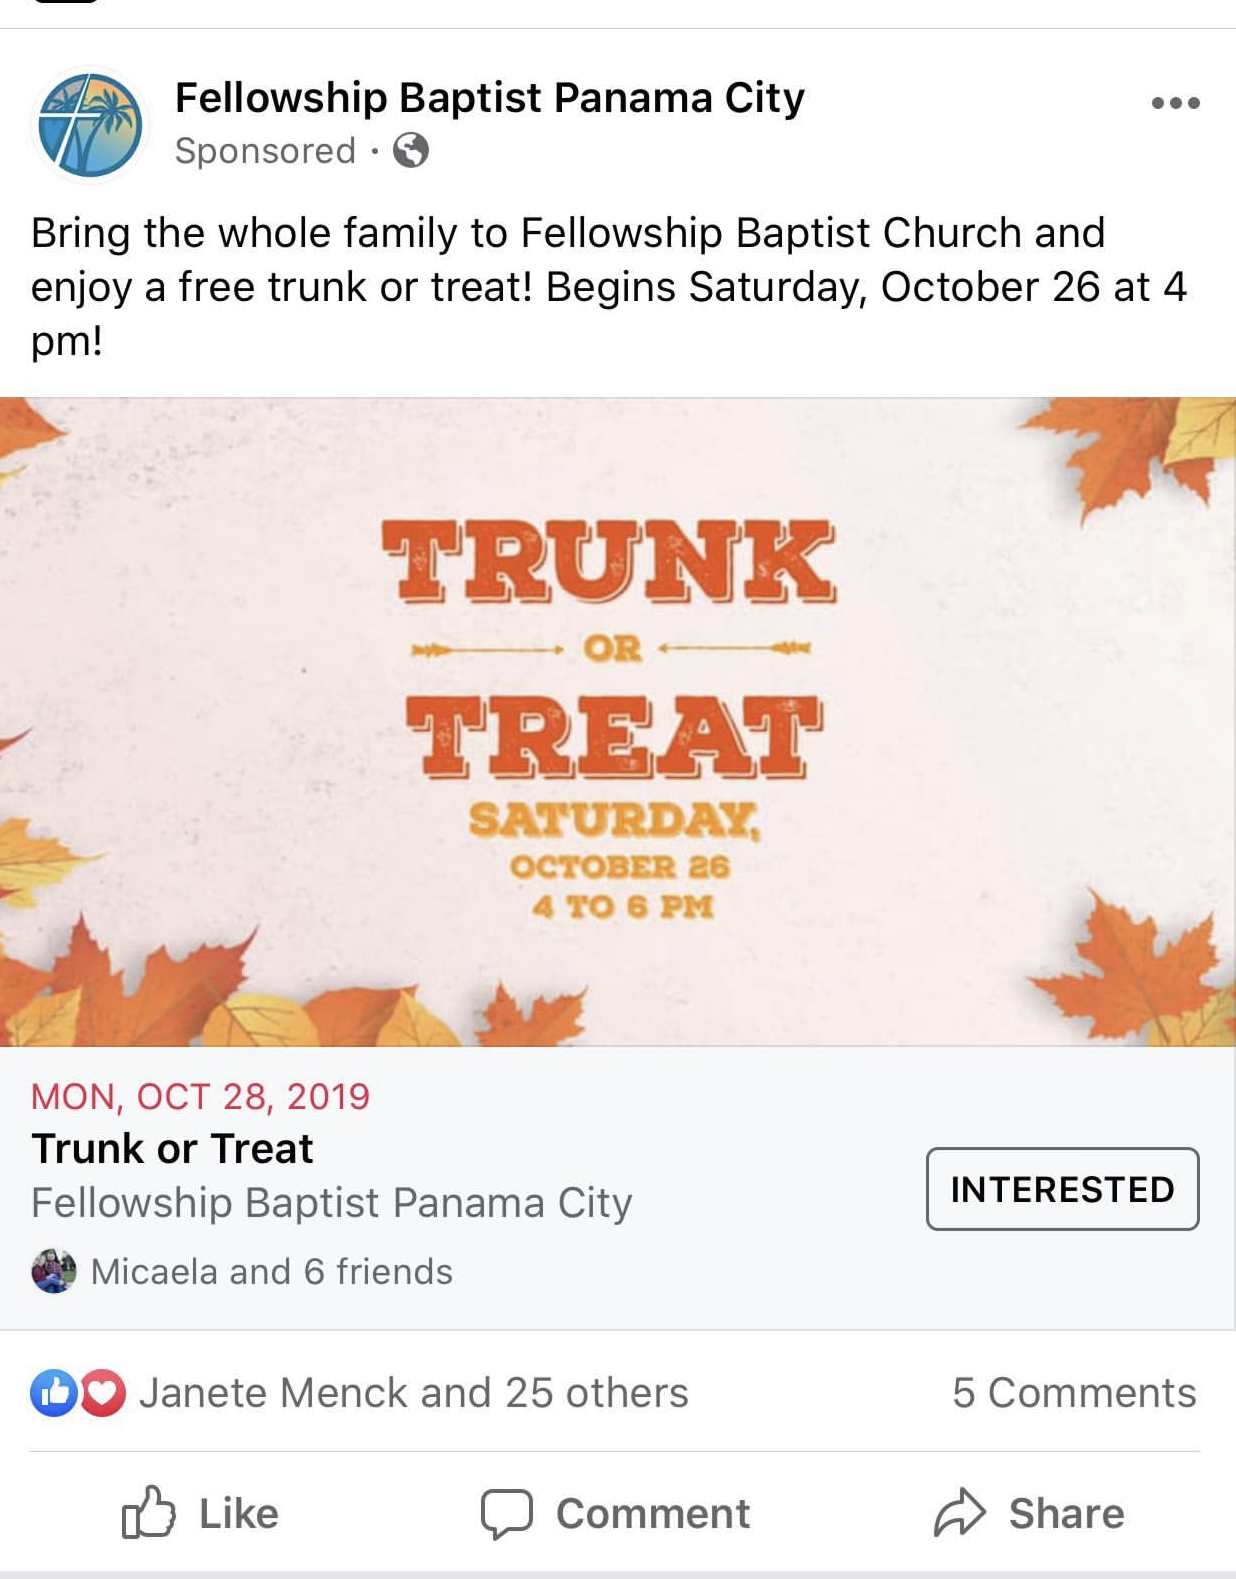 A simple creative ad for a Trunk or Treat event